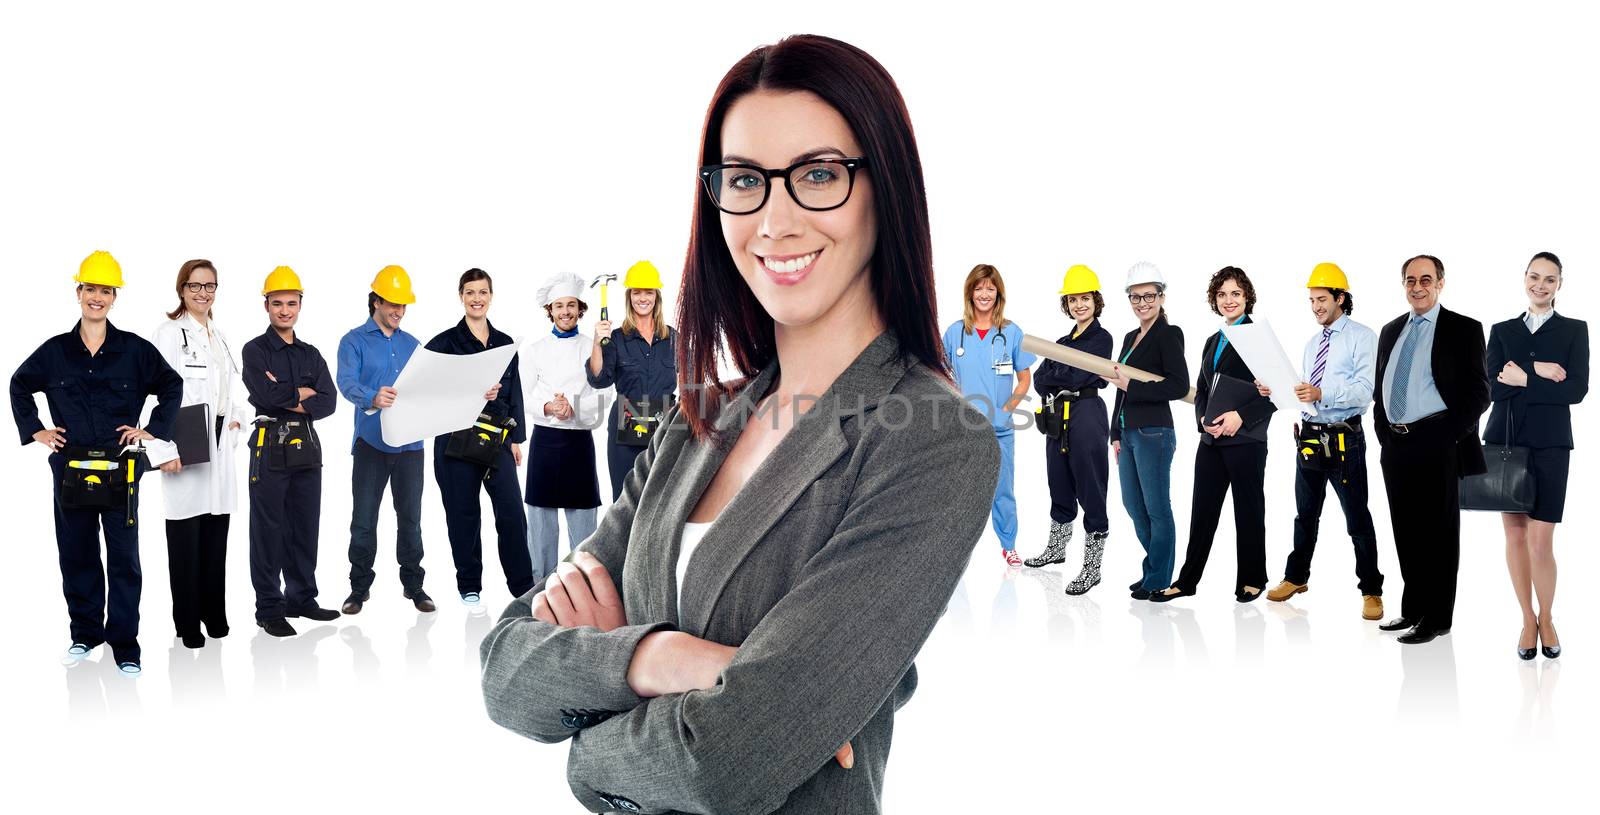 Confident woman leading a business team by stockyimages